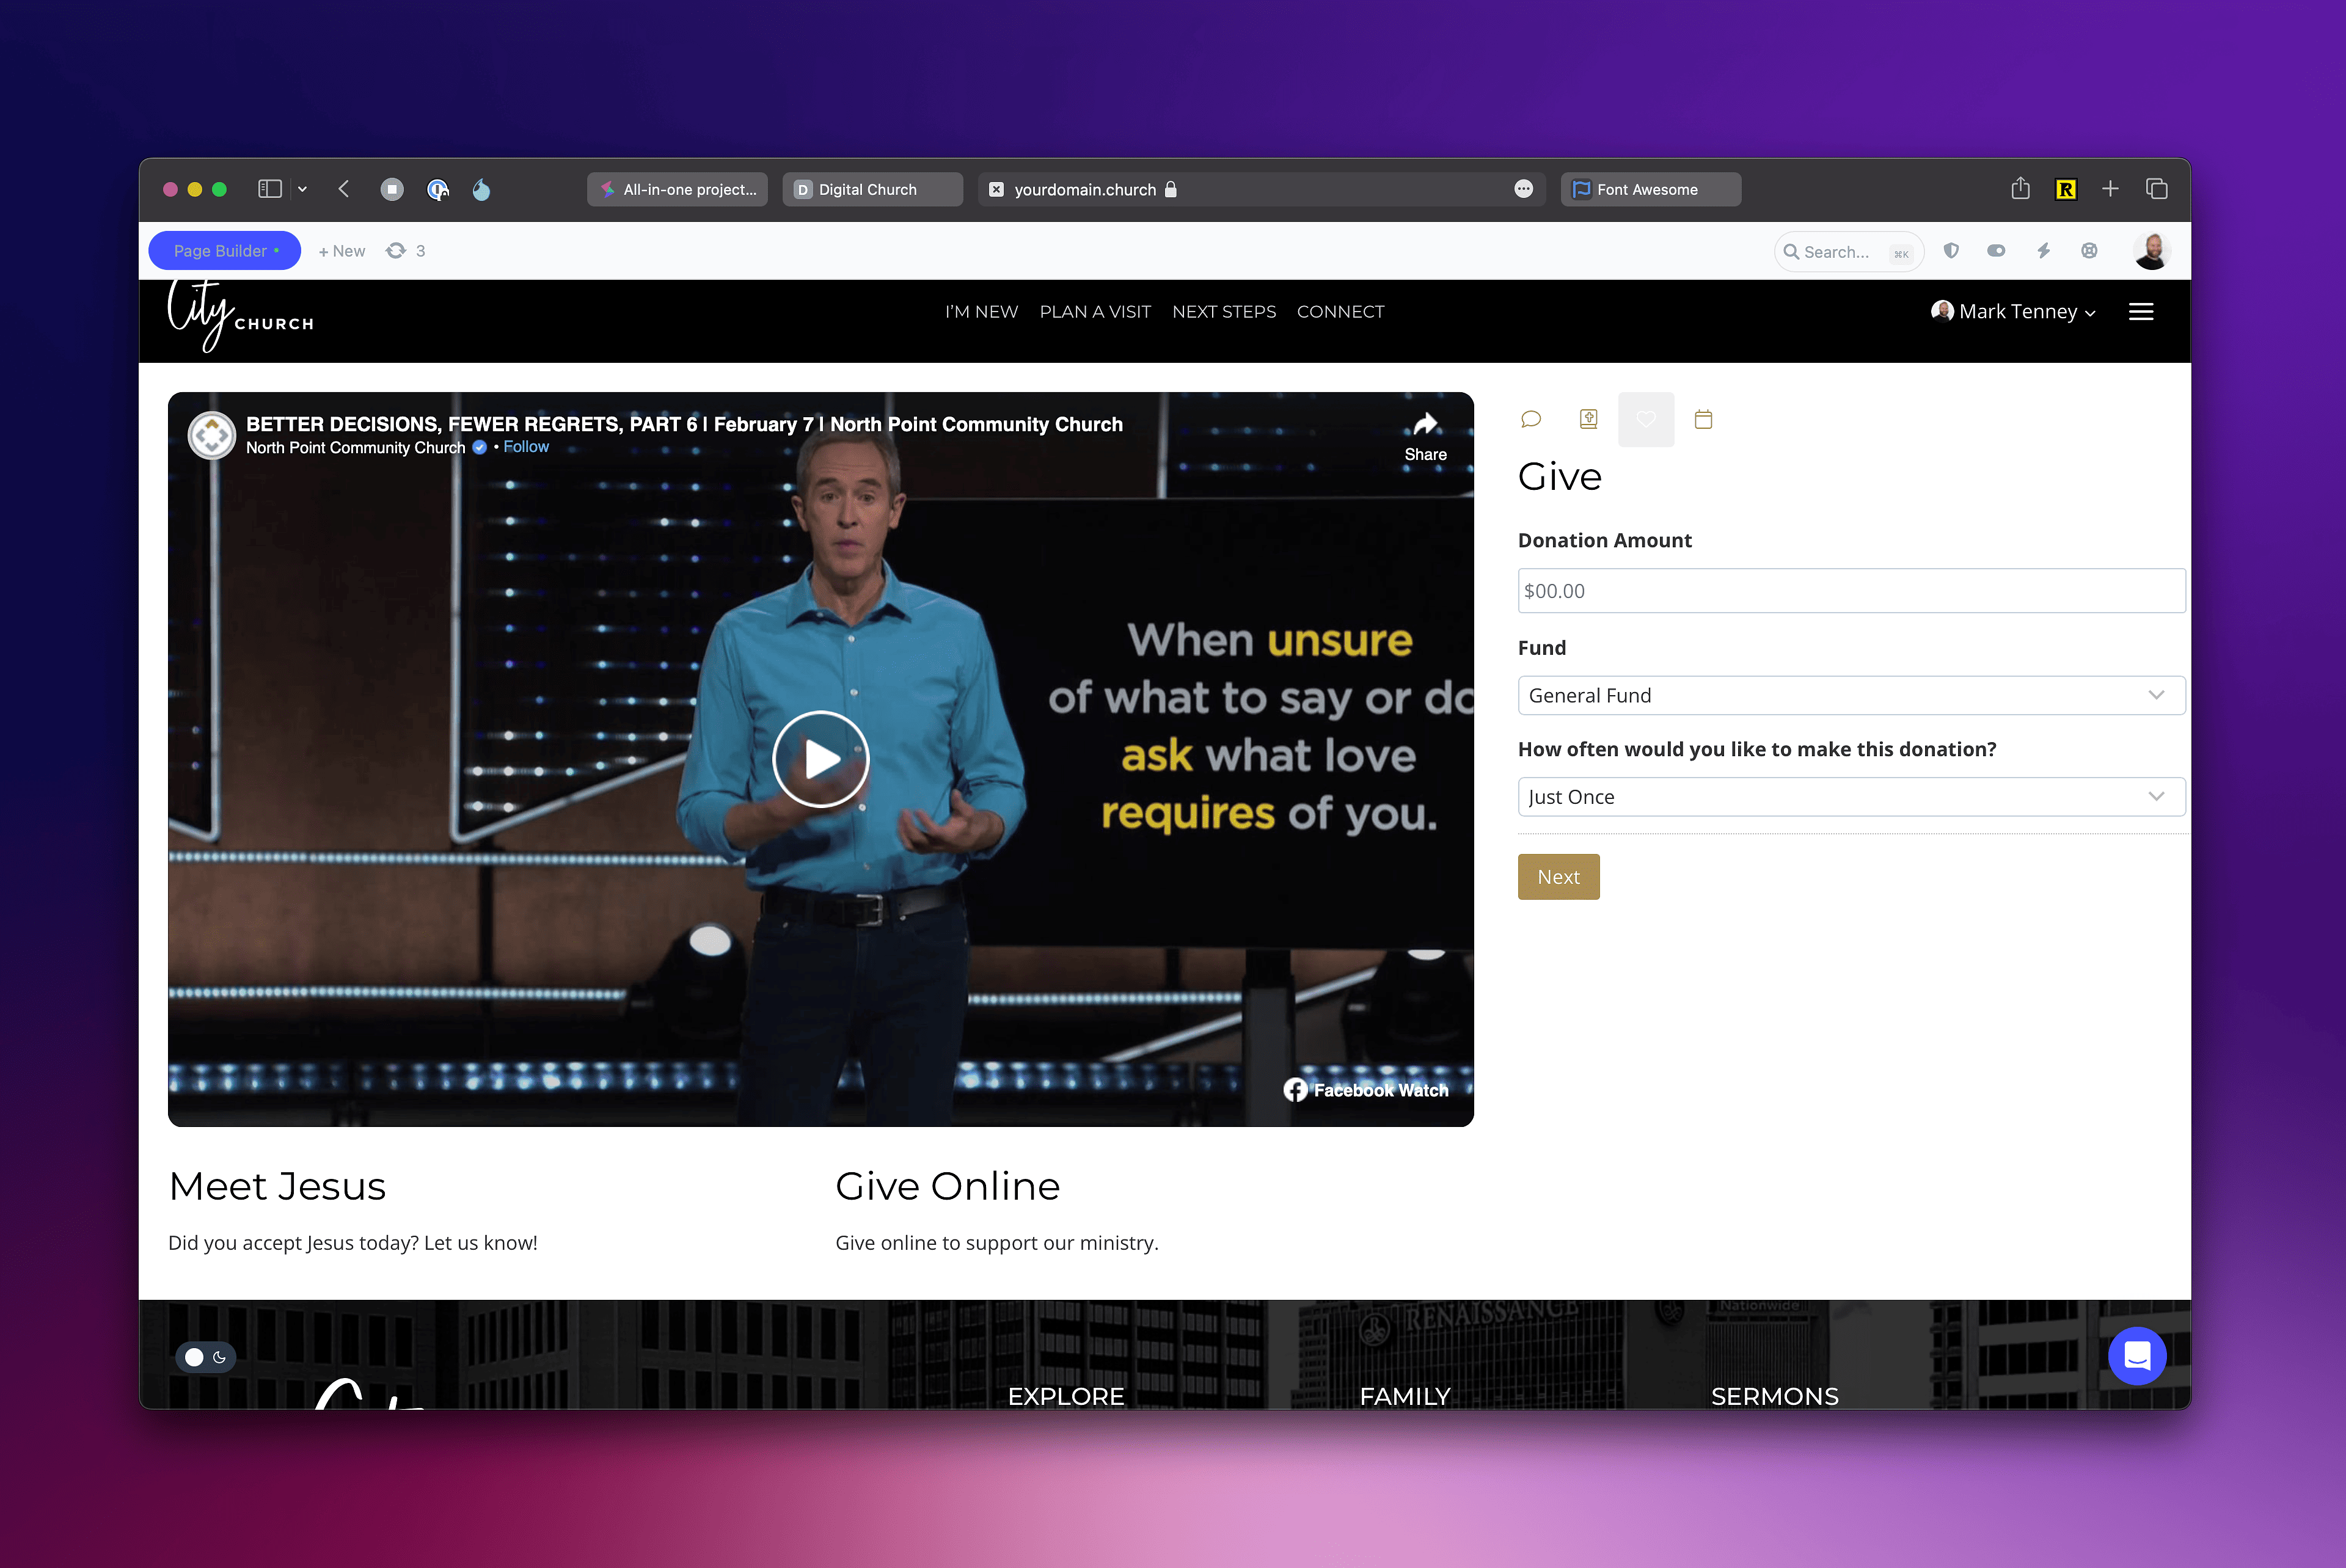 A screen shot of a digital church website with a man on it.